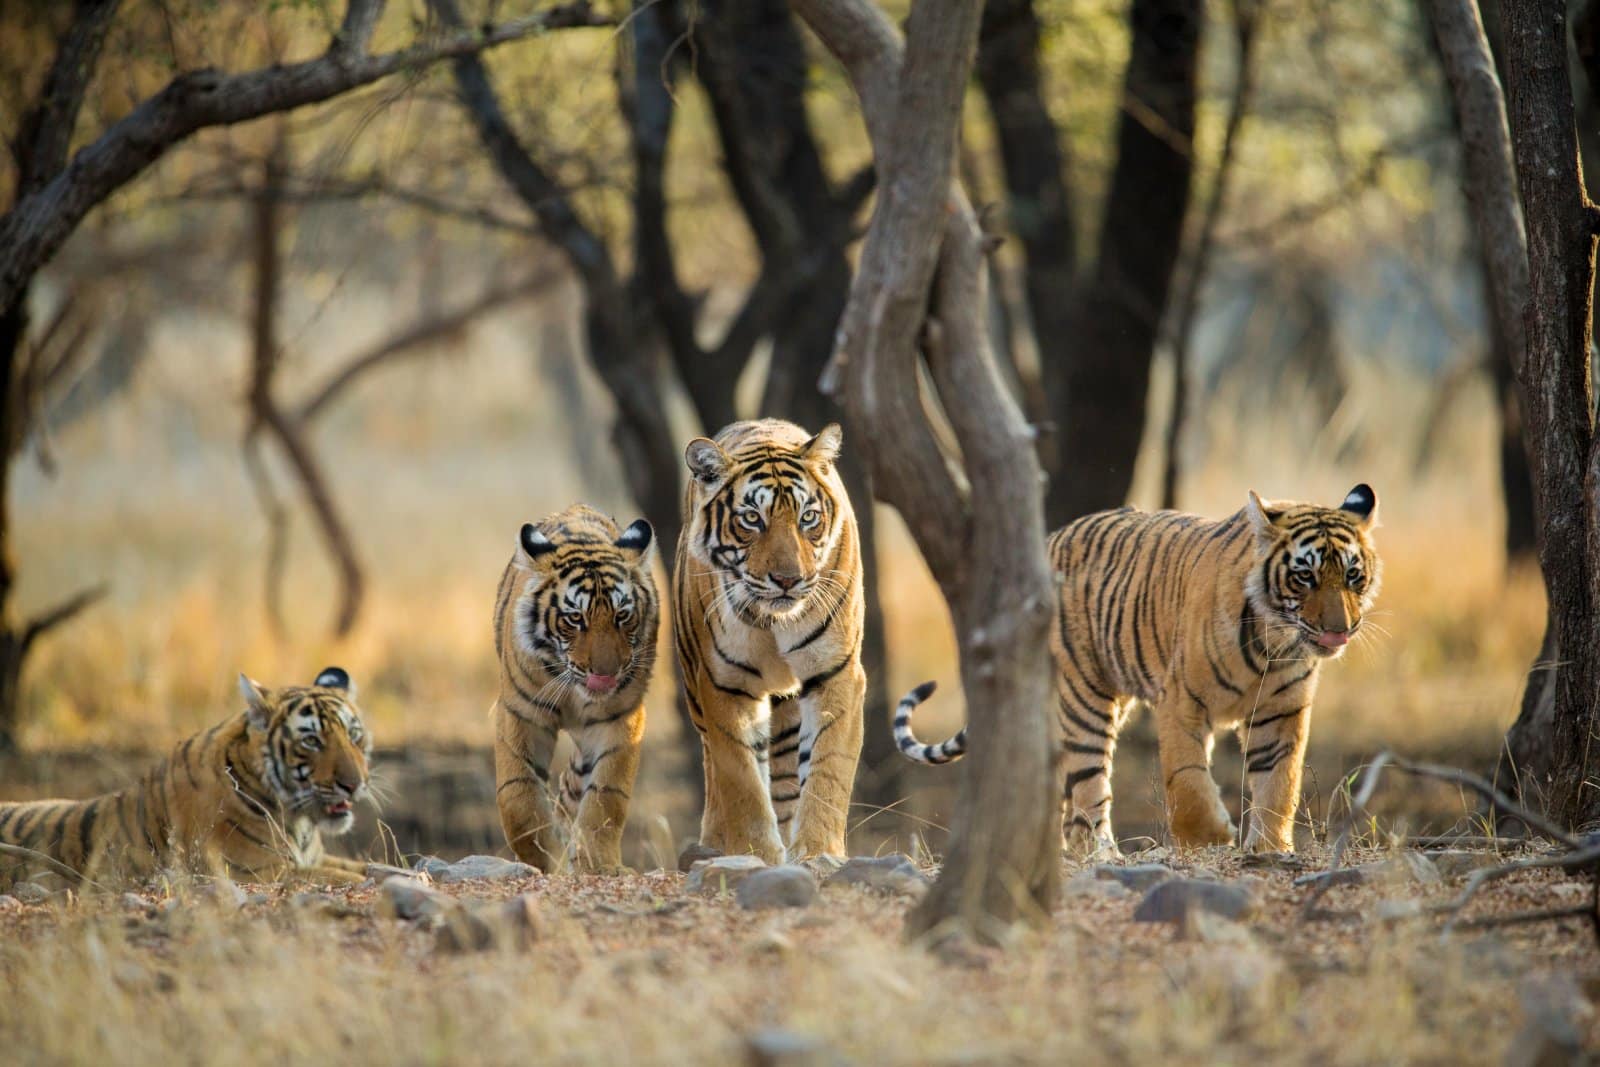 <p class="wp-caption-text">Image Credit: Shutterstock / Archna Singh</p>  <p><span>Ranthambore National Park, once the hunting grounds of the Maharajas of Jaipur, is now one of the best places in India to see Bengal tigers in the wild. The park’s rugged terrain, dotted with ancient ruins, provides a dramatic backdrop for wildlife viewing. Besides tigers, Ranthambore is home to leopards, sloth bears, hyenas, and a variety of deer and bird species. Jeep safaris offer the chance to explore the park’s diverse zones, each offering unique landscapes and wildlife sightings.</span></p>